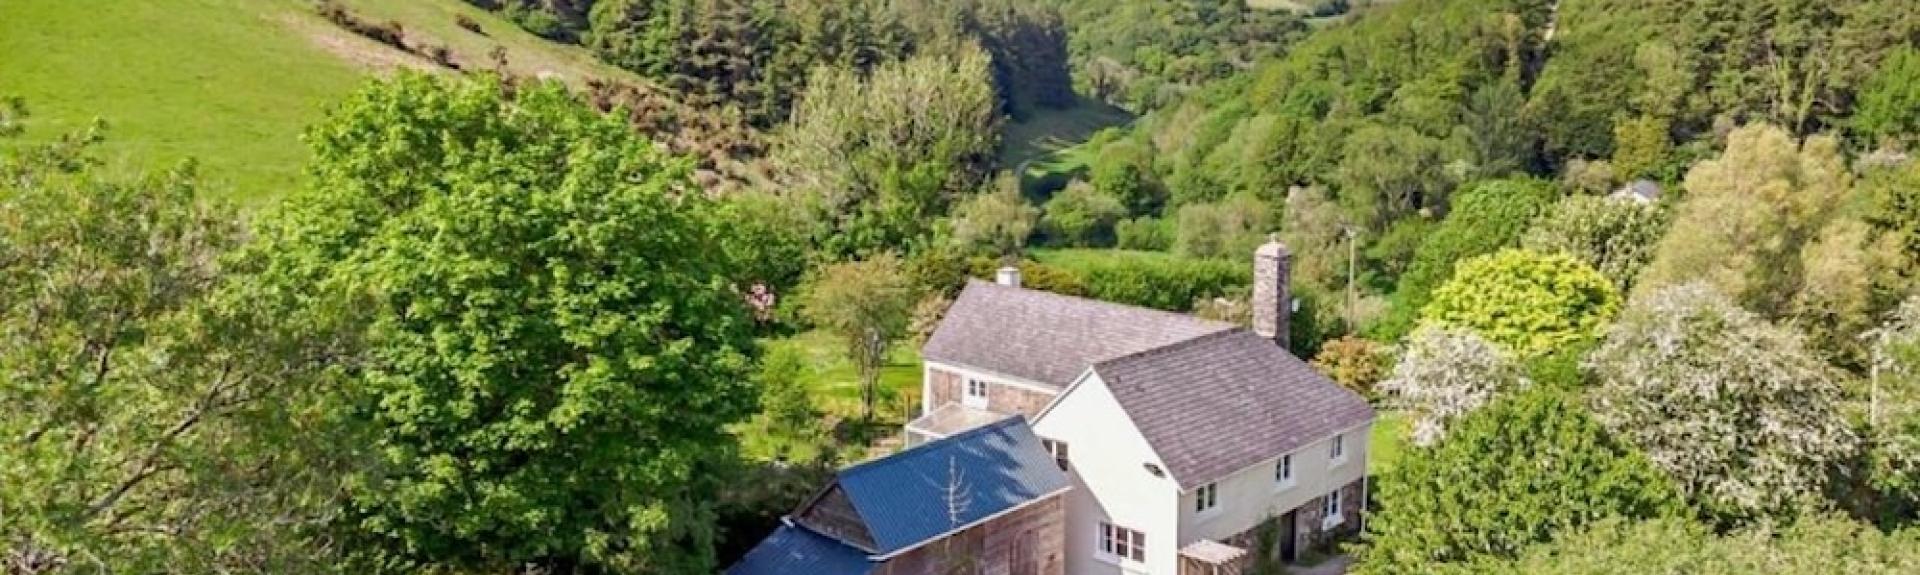 A large Exmoor holiday cottage nestles in a remote wooded valley.